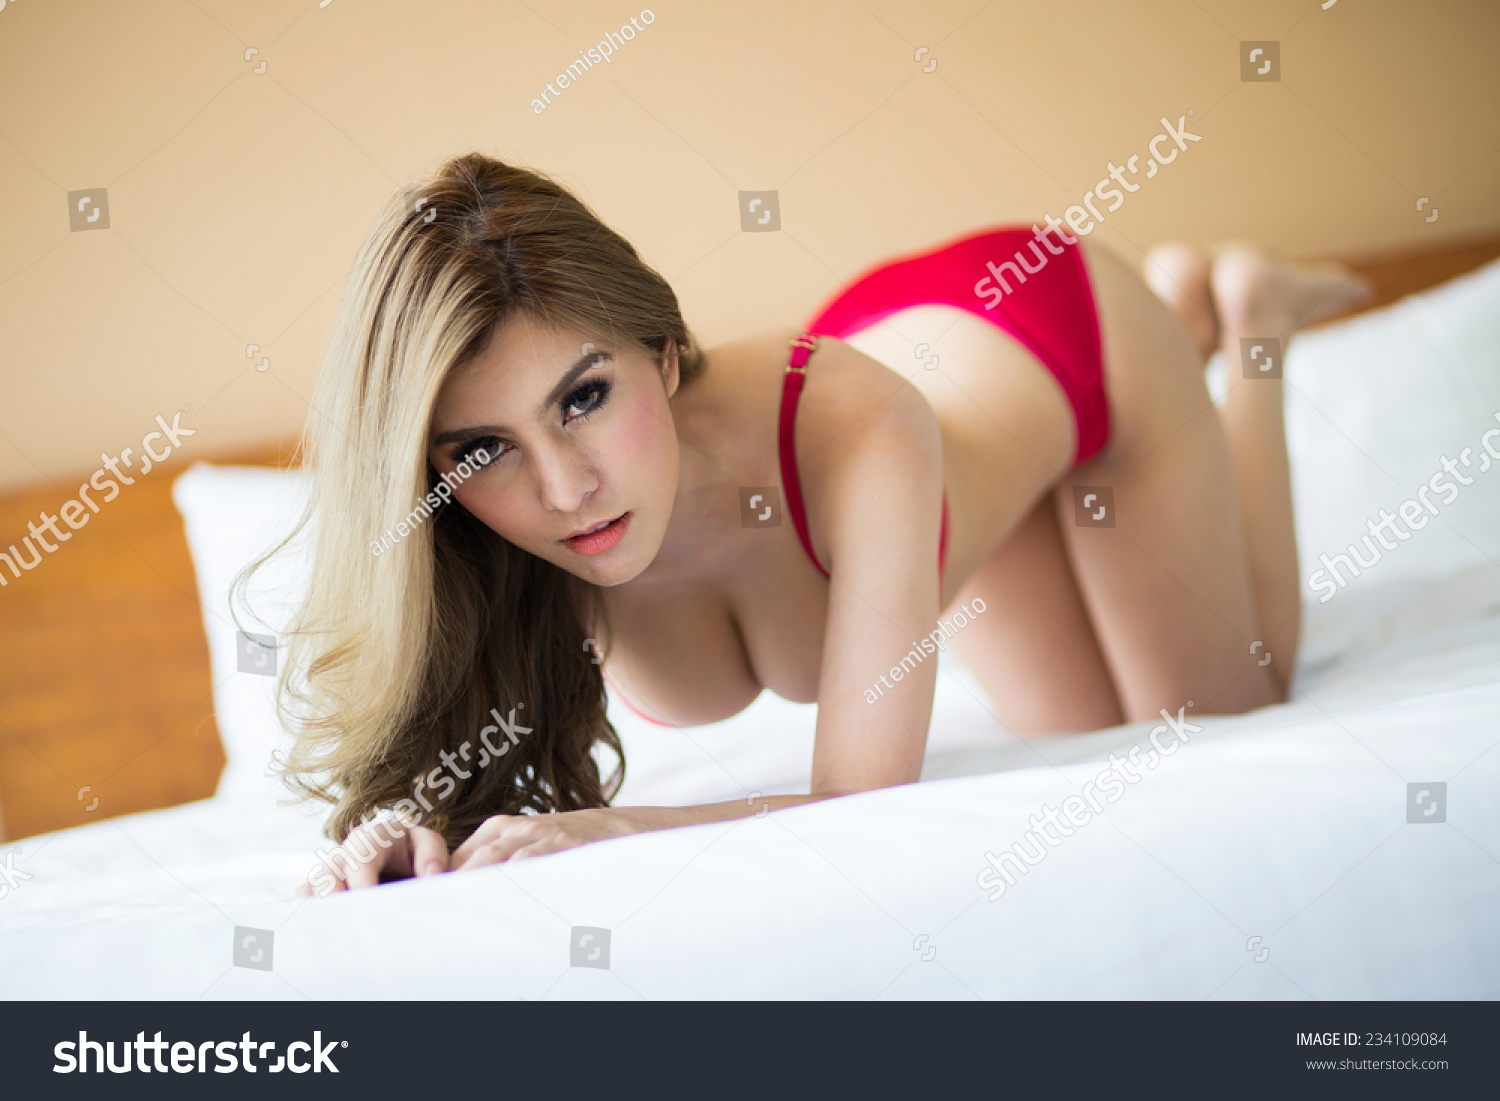 Sexy bed girl